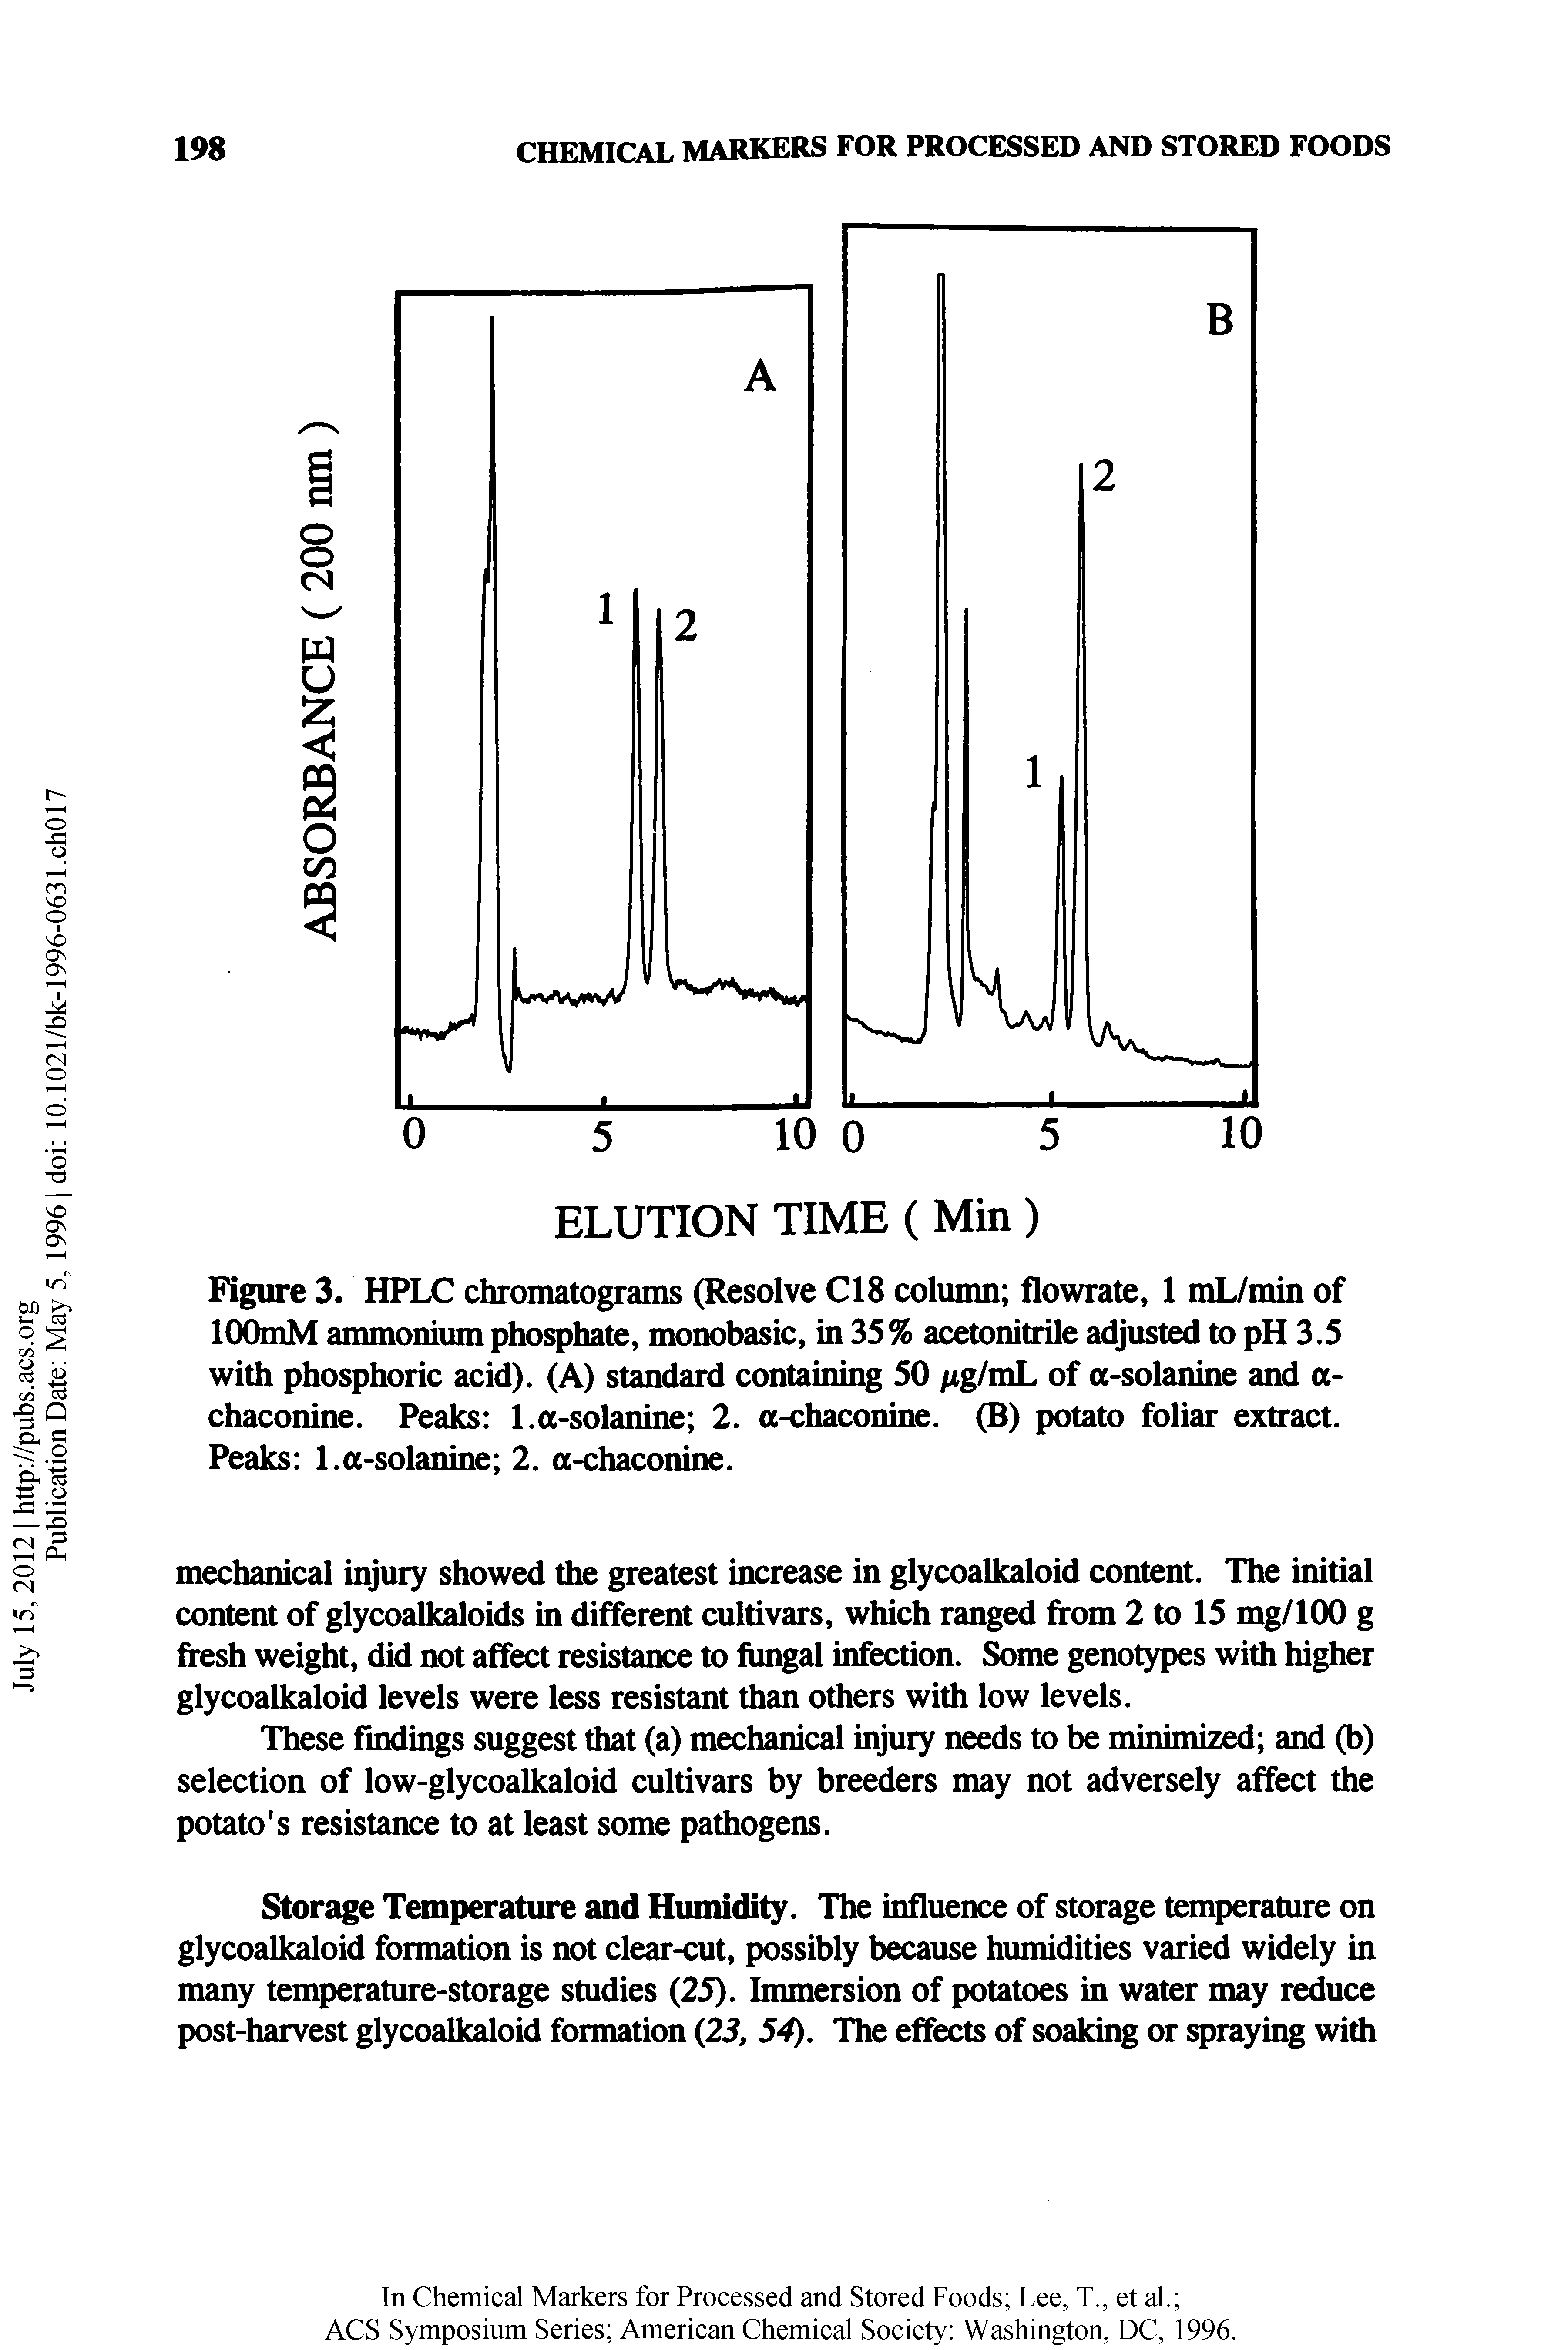 Figure 3. HPLC chromatograms (Resolve C18 column flowrate, 1 mL/min of lOOmM ammonium phosphate, monobasic, in 35% acetonitrile adjusted to pH 3.5 with phosphoric acid). (A) standard containing 50 fig/mL of a-solanine and a-chaconine. Peaks 1.a-solanine 2. a-chaconine. (B) potato foliar extract. Peaks 1.a-solanine 2. a-chaconine.